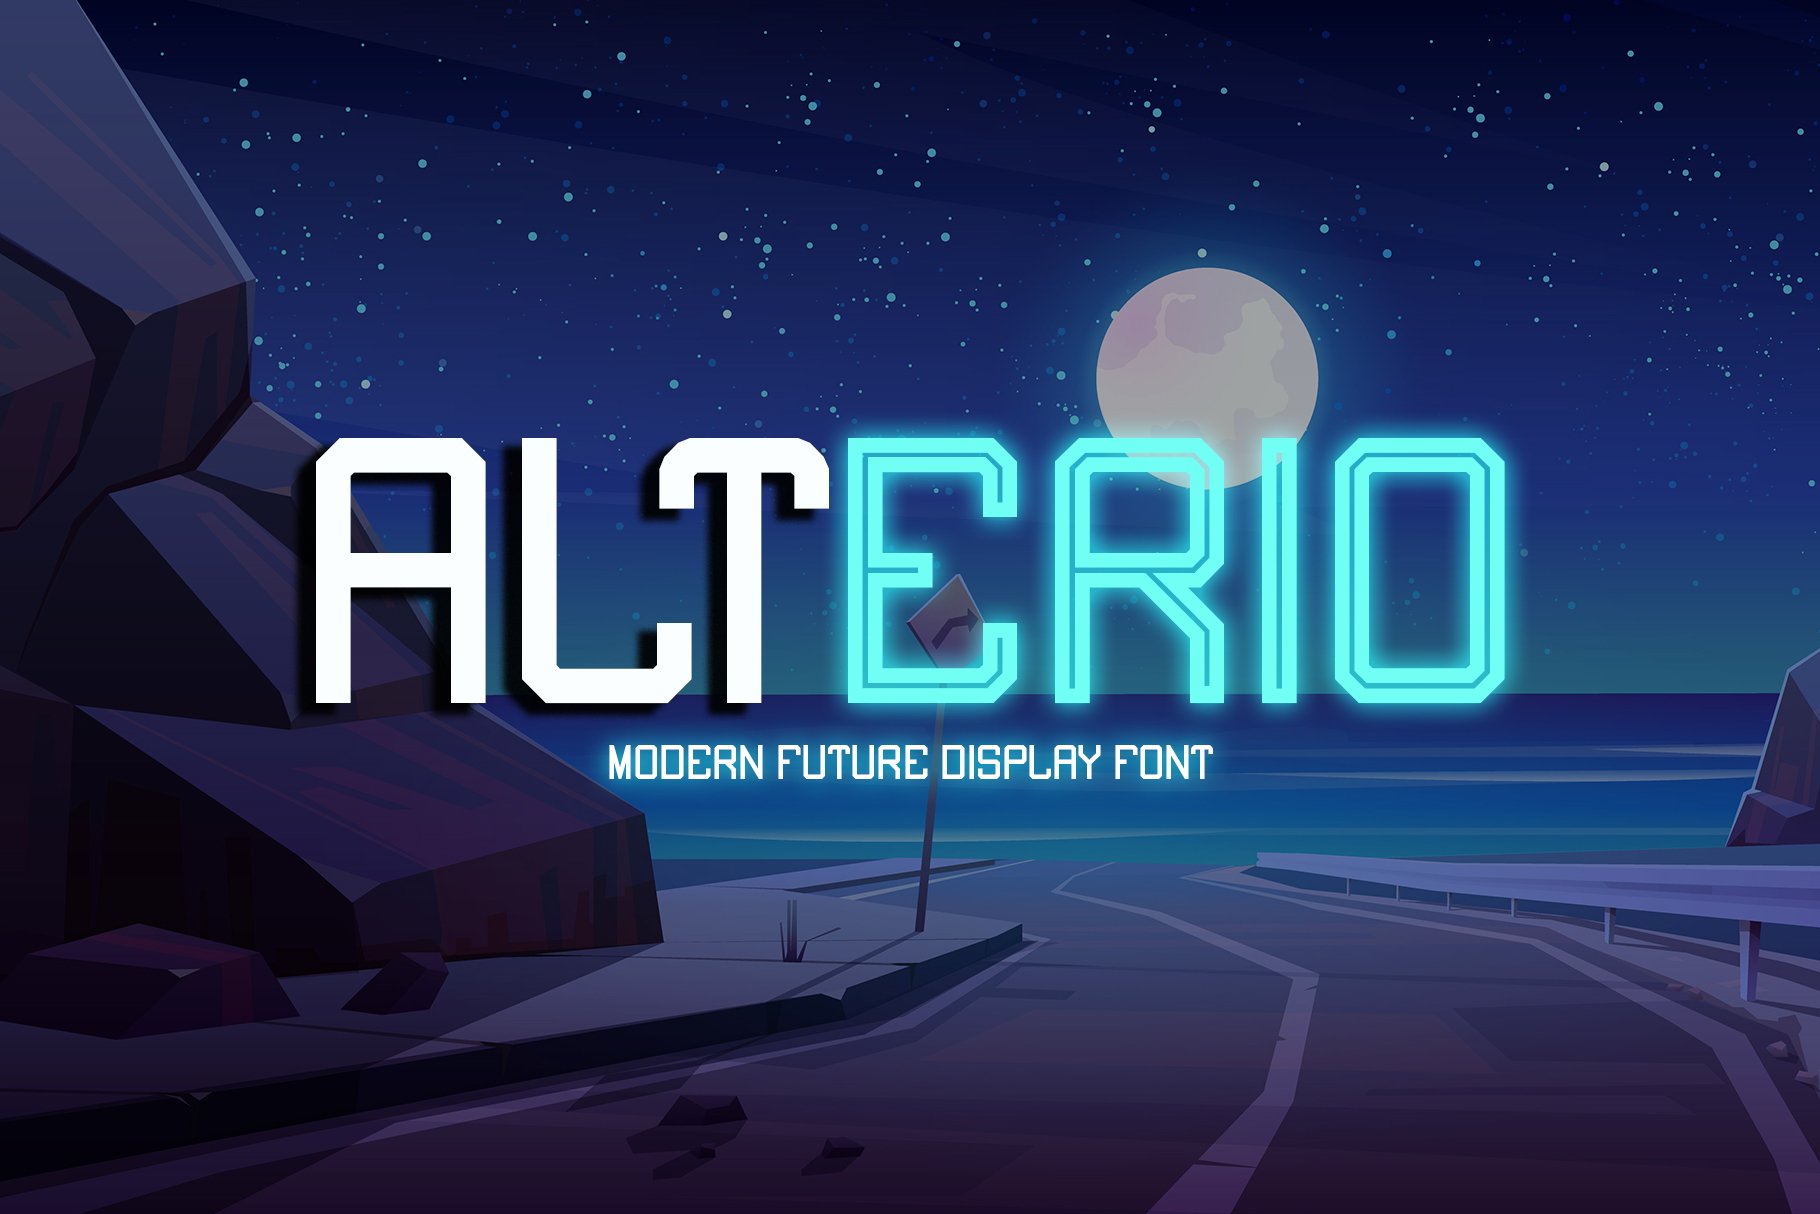 Alterio || Modern Display Font cover image.